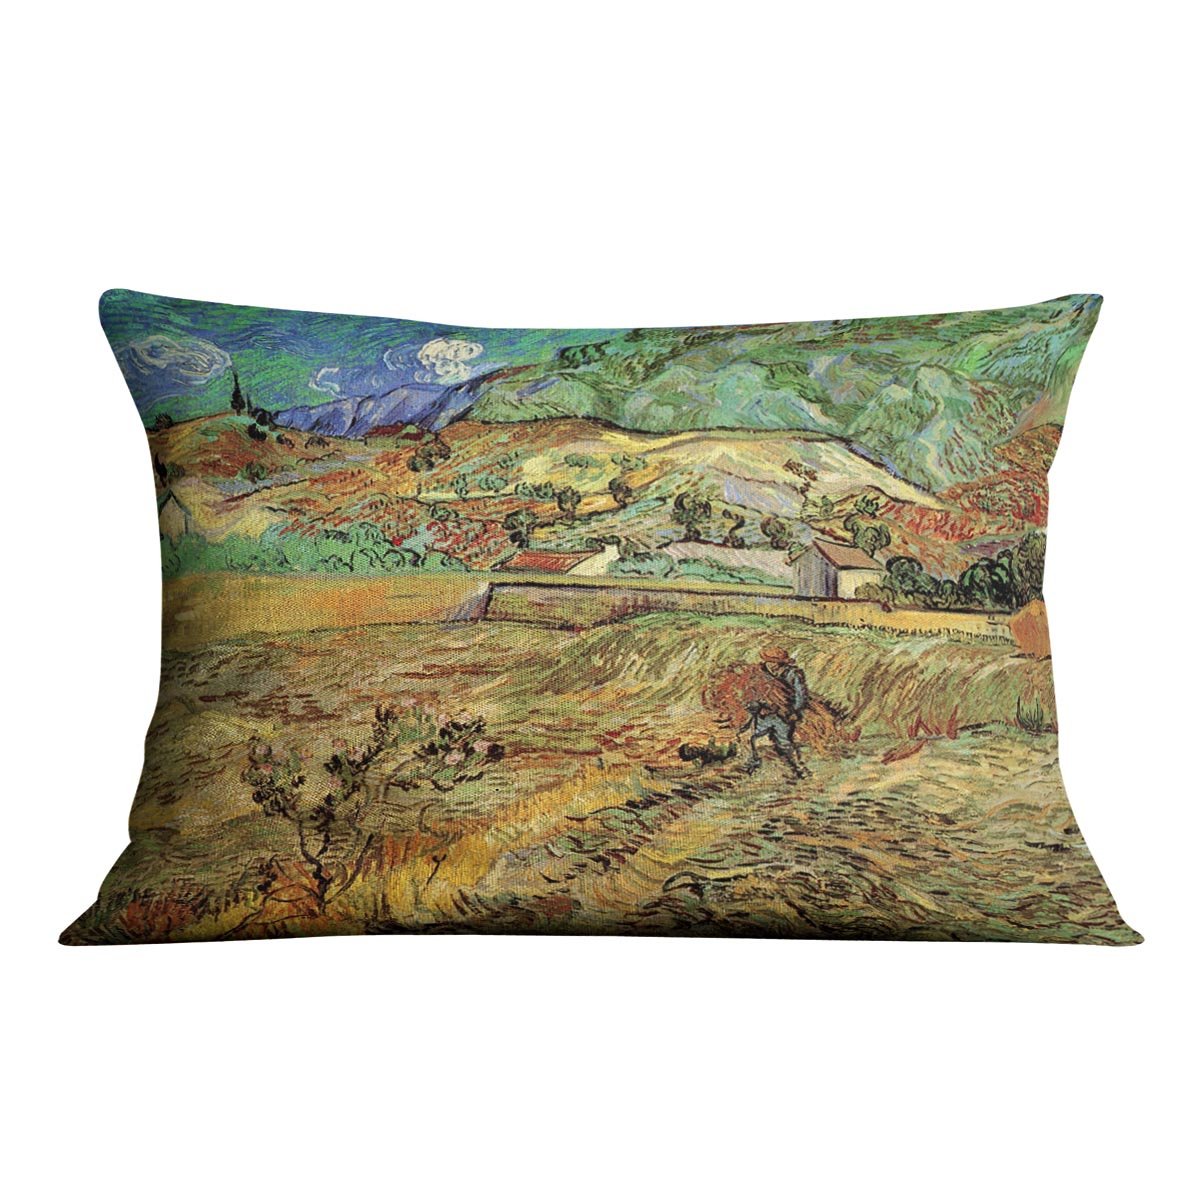 Enclosed Wheat Field with Peasant by Van Gogh Throw Pillow